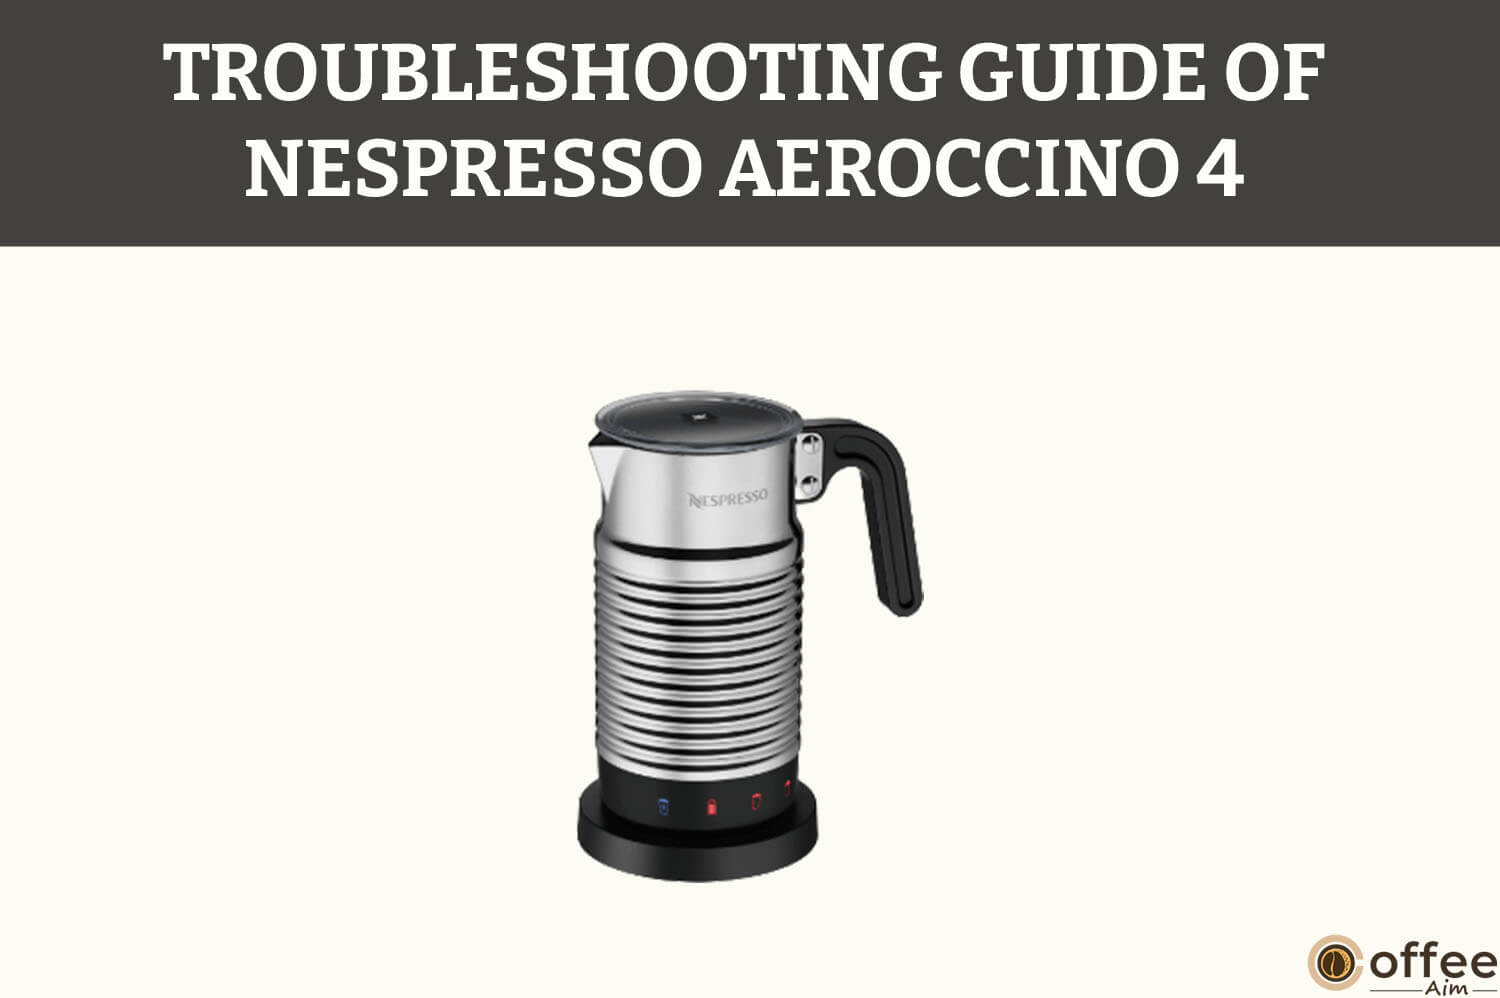 Featured image for the article "Troubleshooting of Nespresso Aeroccino 4"